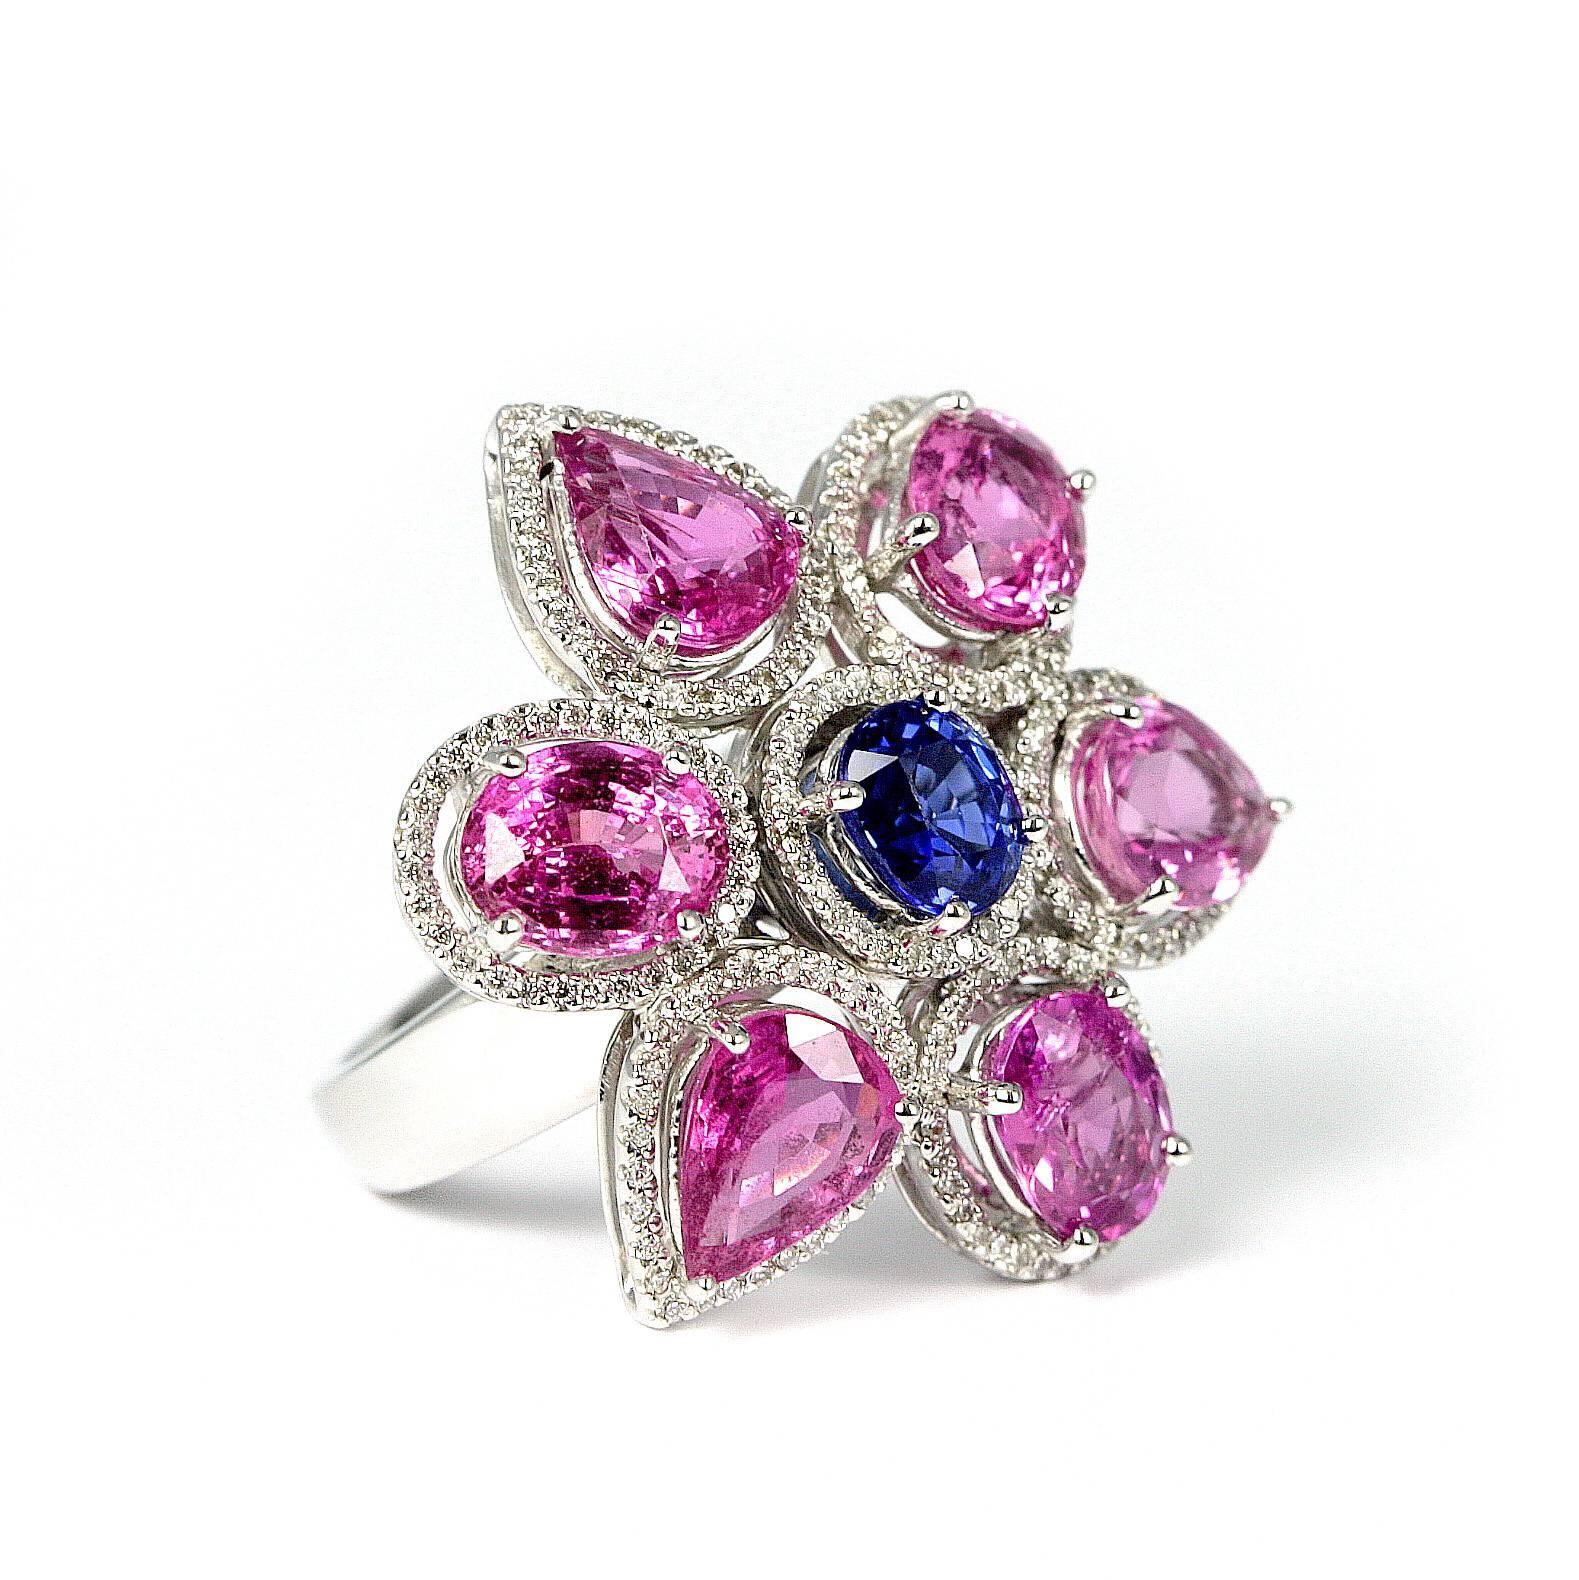 7.70 carats of beautiful pink oval and pear shape sapphires and a center blue  oval sapphire weighing approximately 1.20 carats. The 18 karat white ring is surrounded with diamonds weighing .56 carats. Size 6 1/4